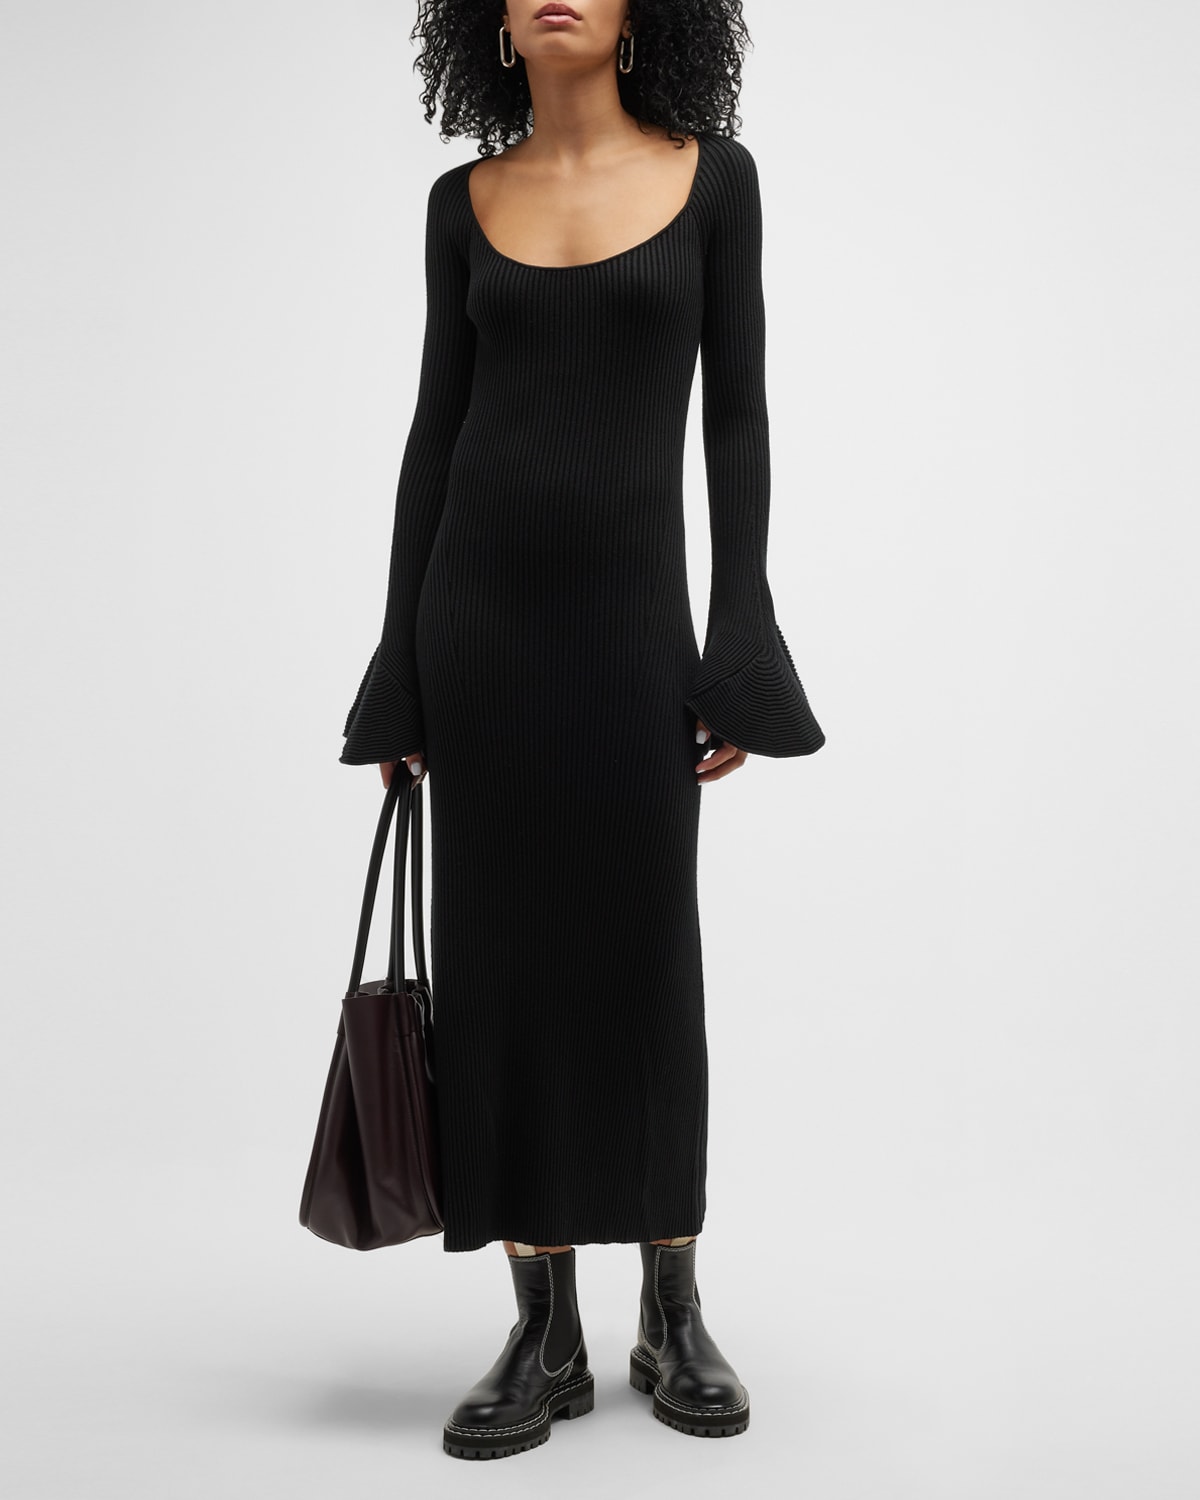 PROENZA SCHOULER CASHMERE KNIT DRESS W/ FLUTED SLEEVES